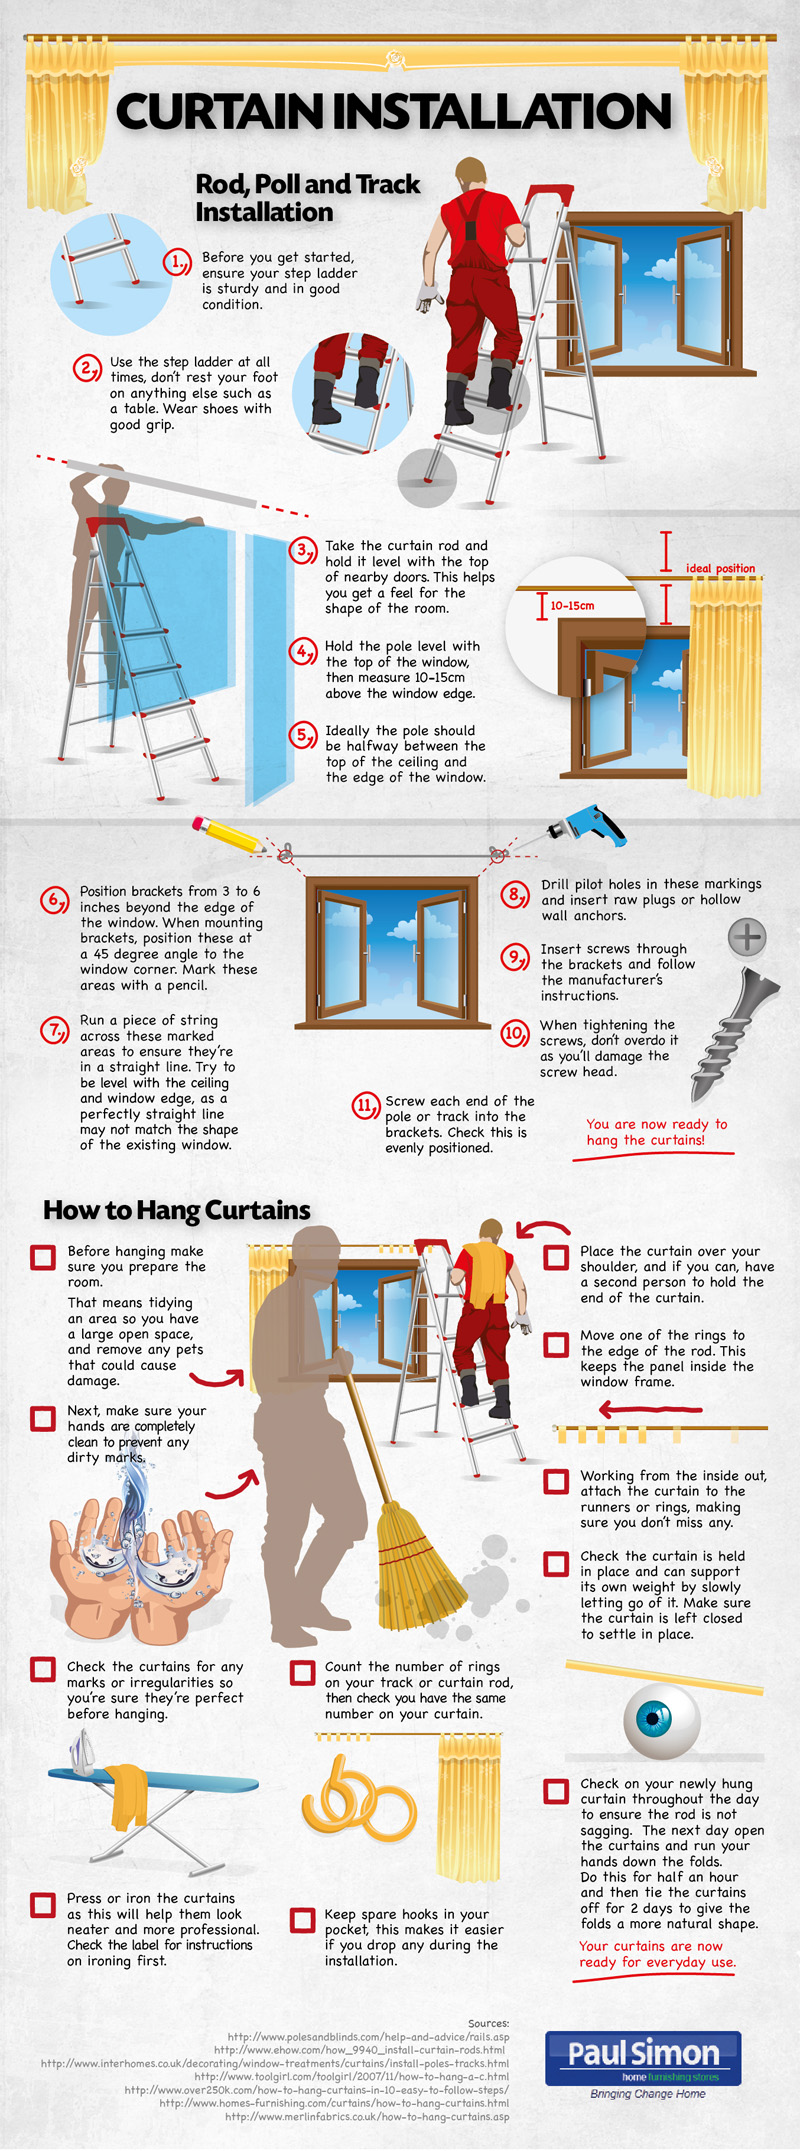 How to Install Curtains 1